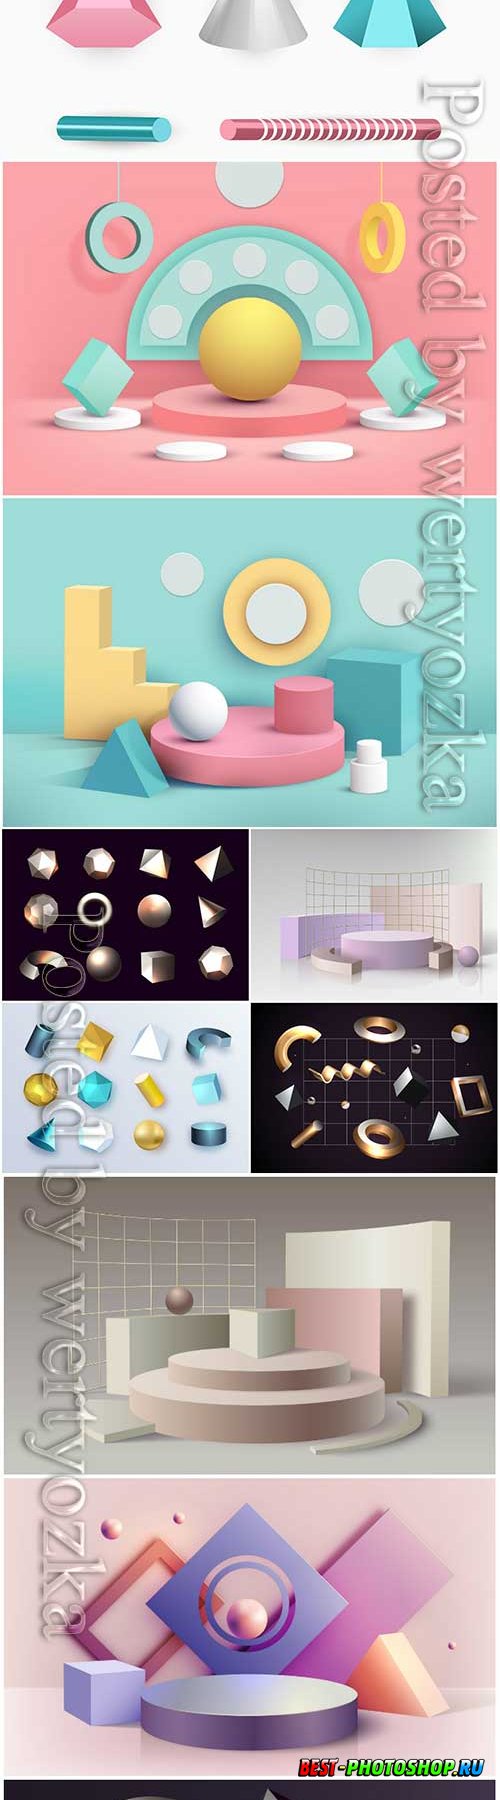 Geometric shapes in 3d effect vector illustration